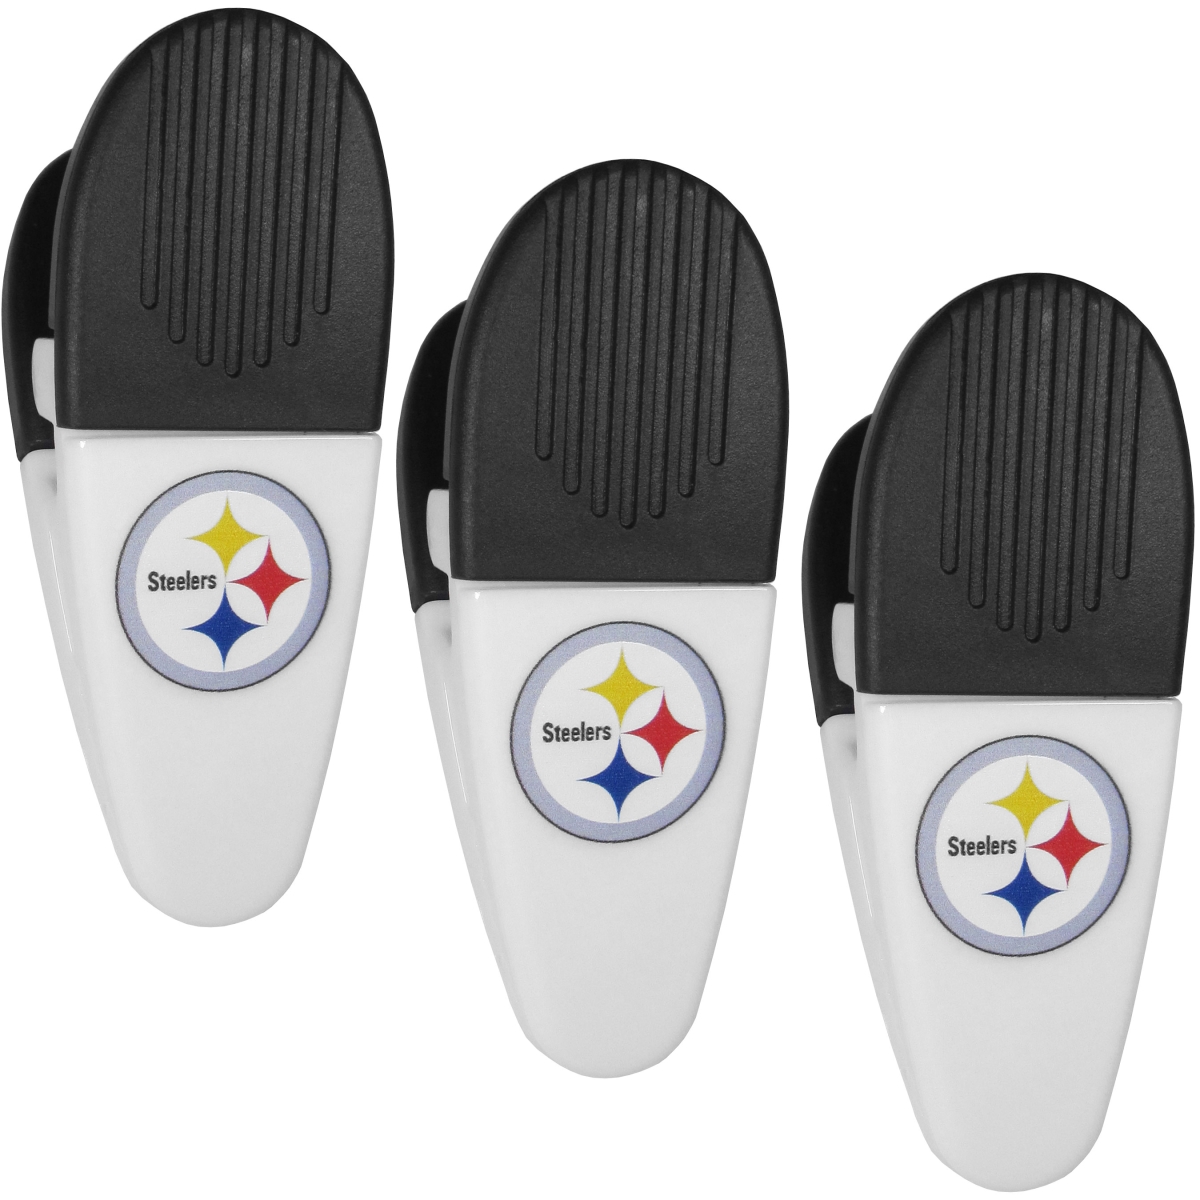 Picture of Siskiyou F3CM160 Unisex NFL Pittsburgh Steelers Mini Chip Clip Magnets - Pack of 3